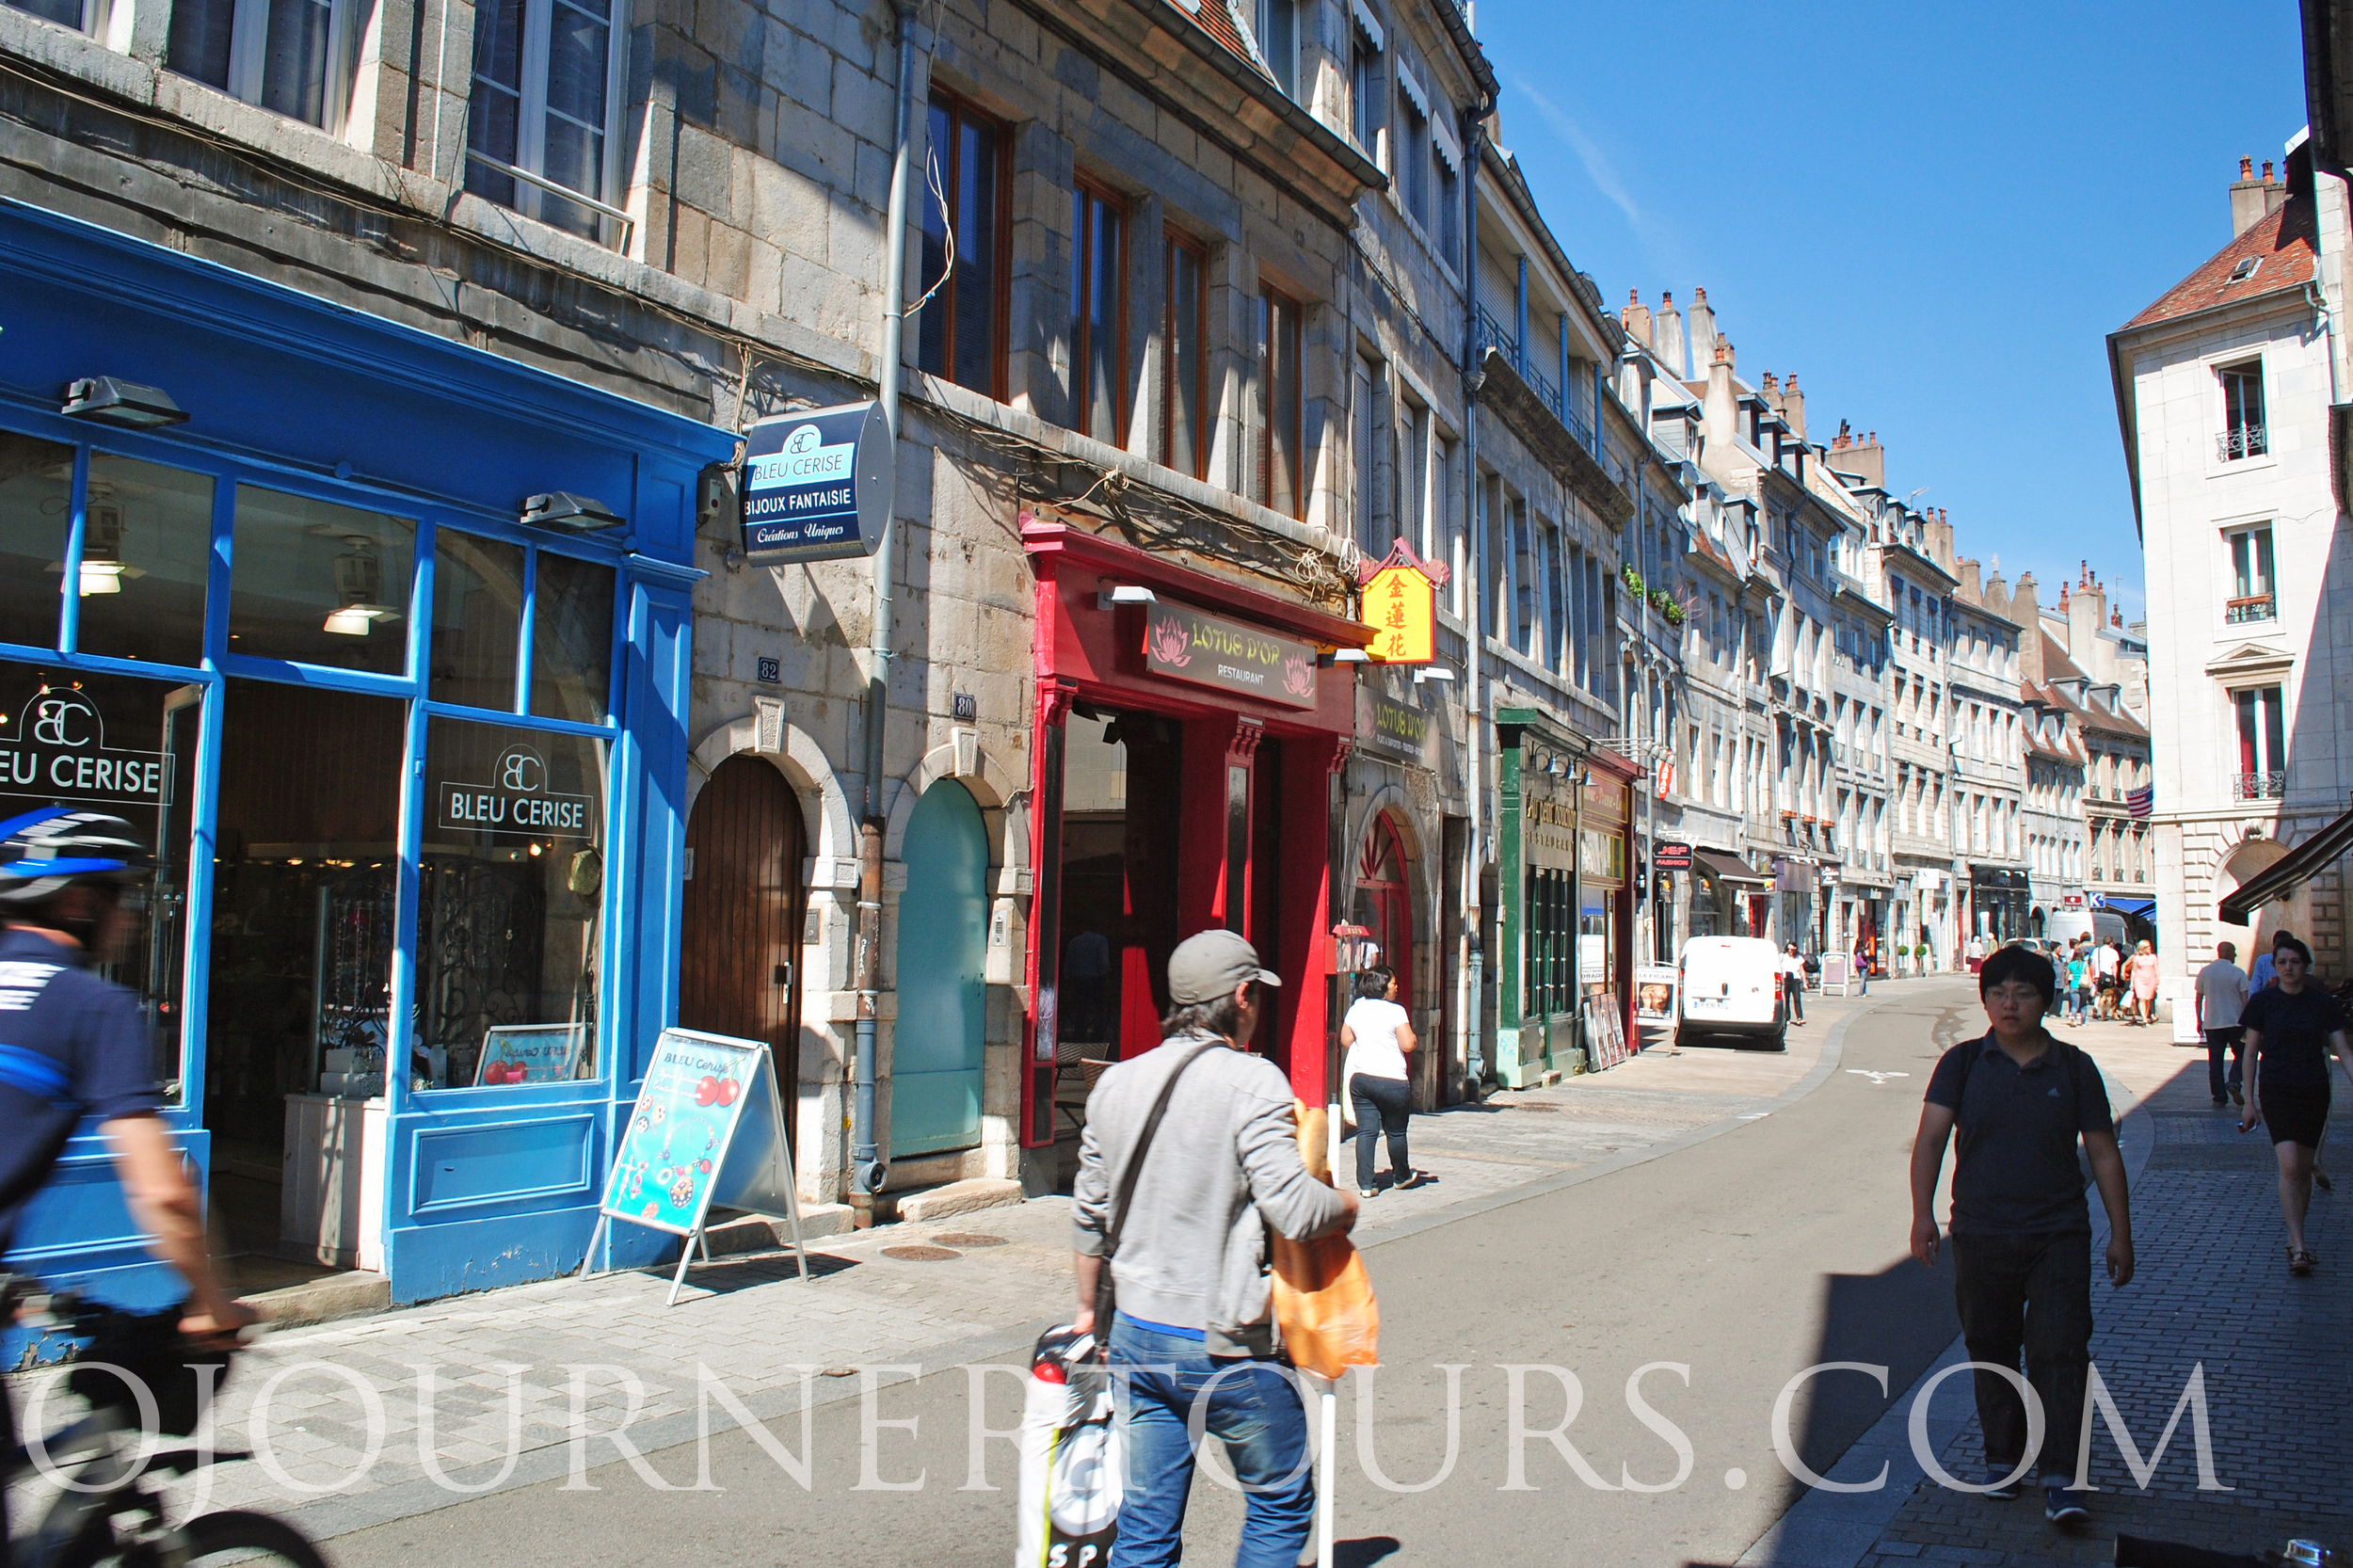 French Language & Culture Immersion: Sojourner Tours